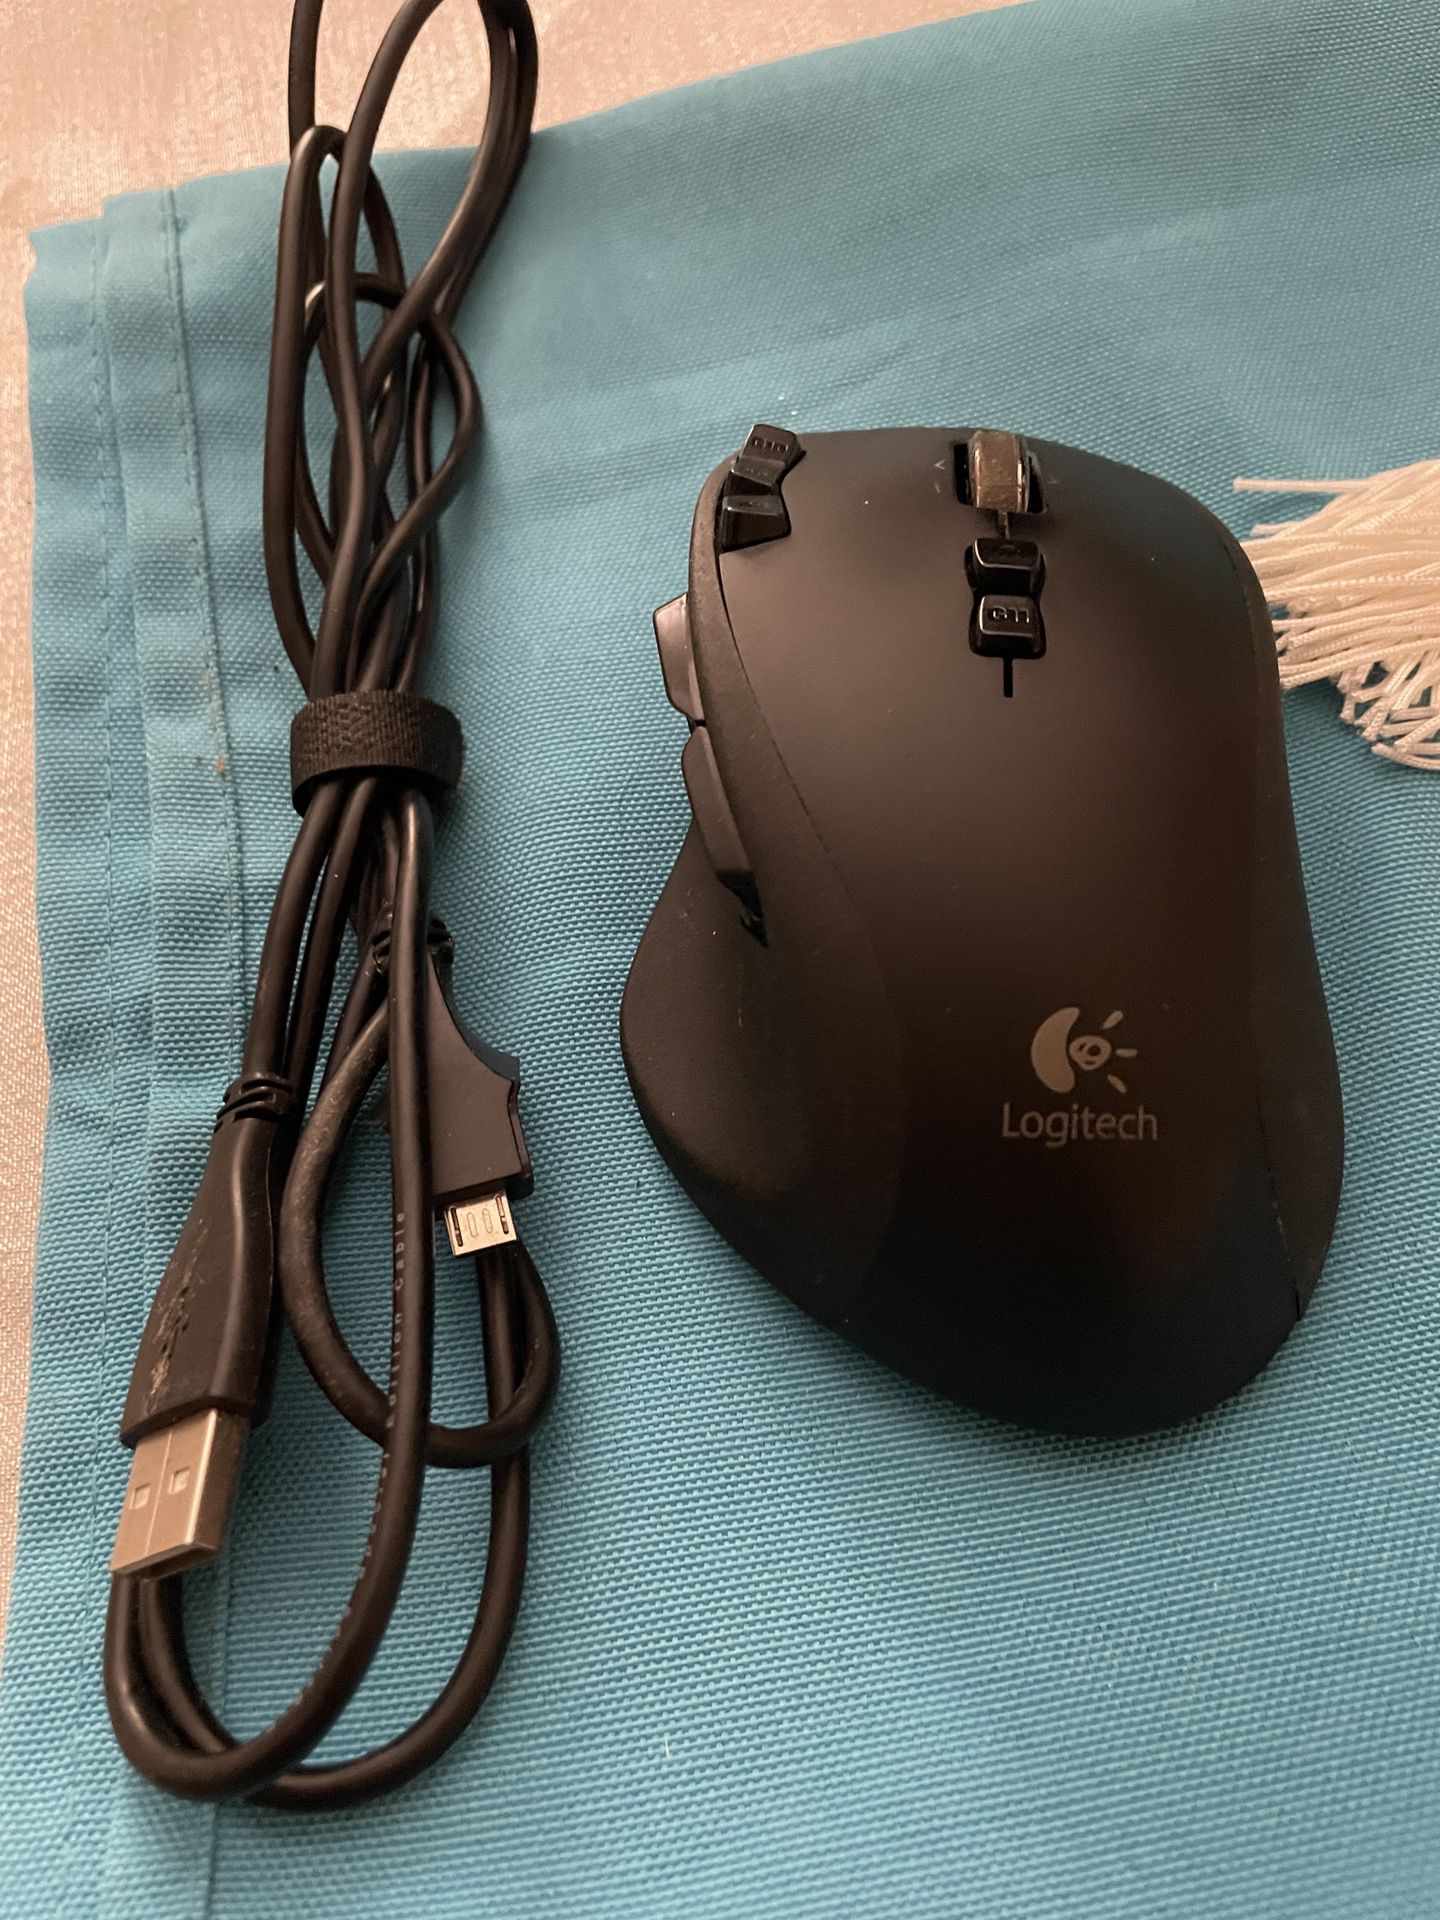 ved godt aktivering Ofte talt Logitech G Series G700 Wireless Laser Gaming Mouse w/ USB Receiver and  Cable for Sale in Queens, NY - OfferUp